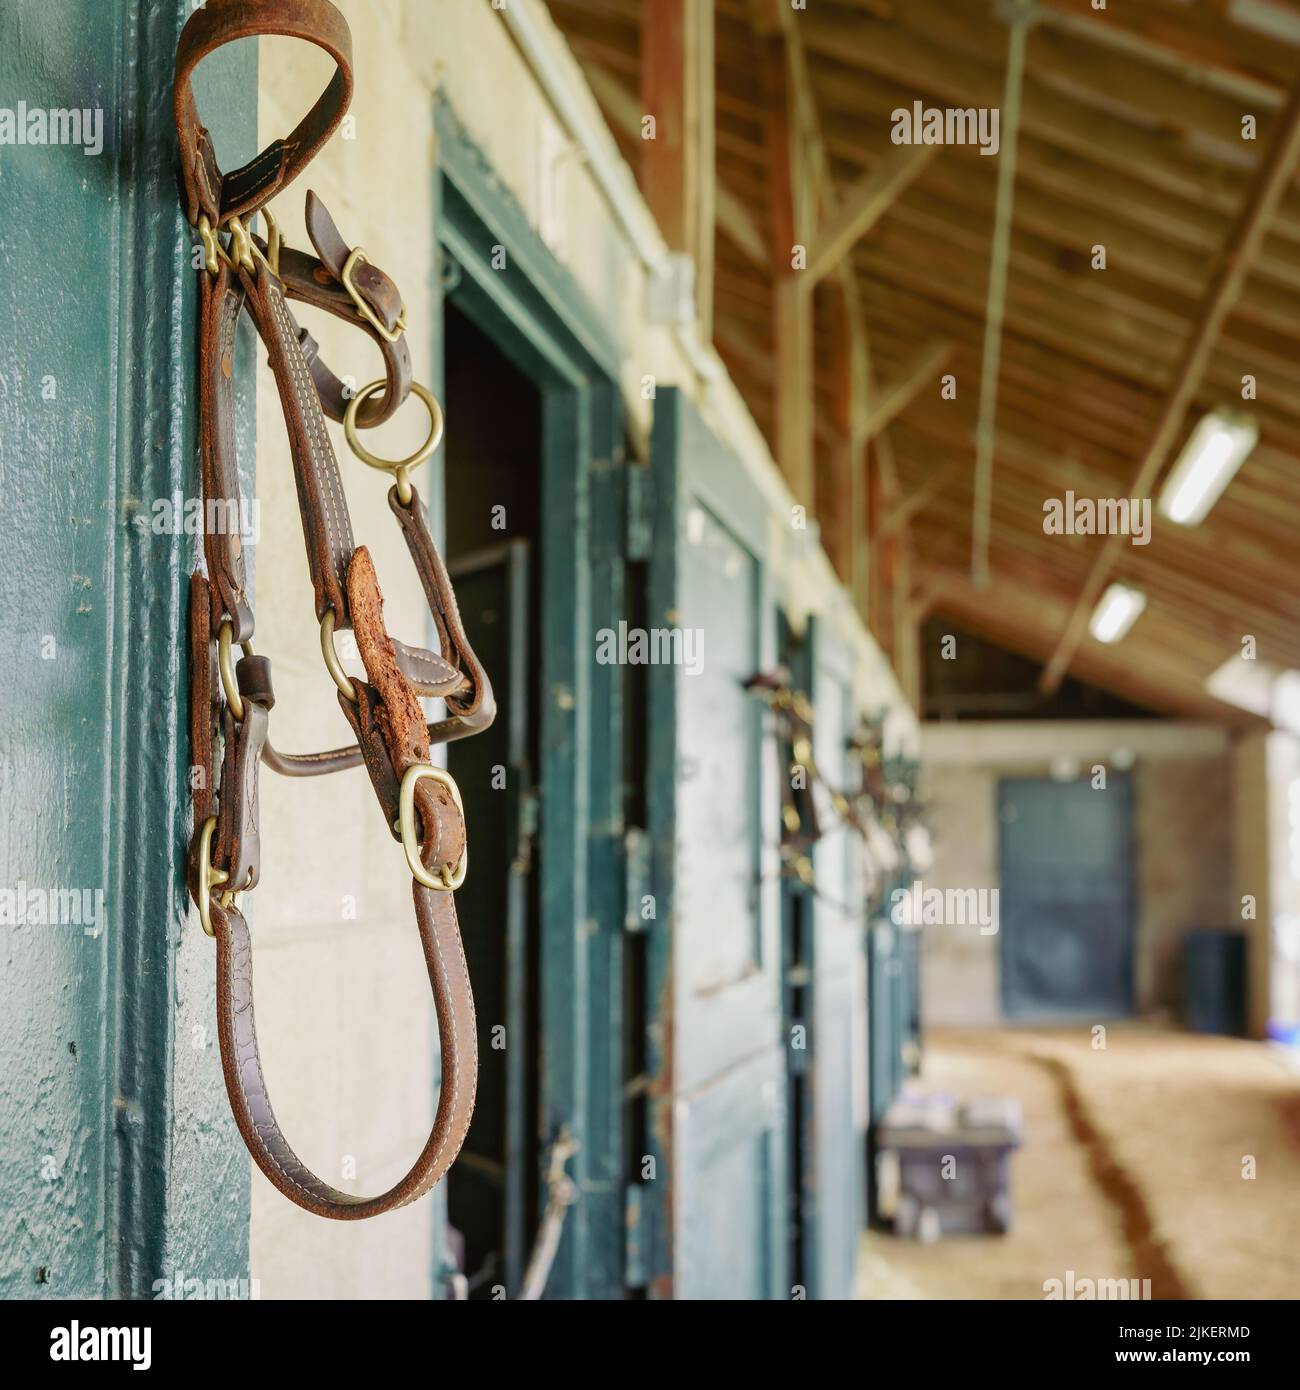 Leather briddle or horse halter hanging in a stable for race horses Stock Photo